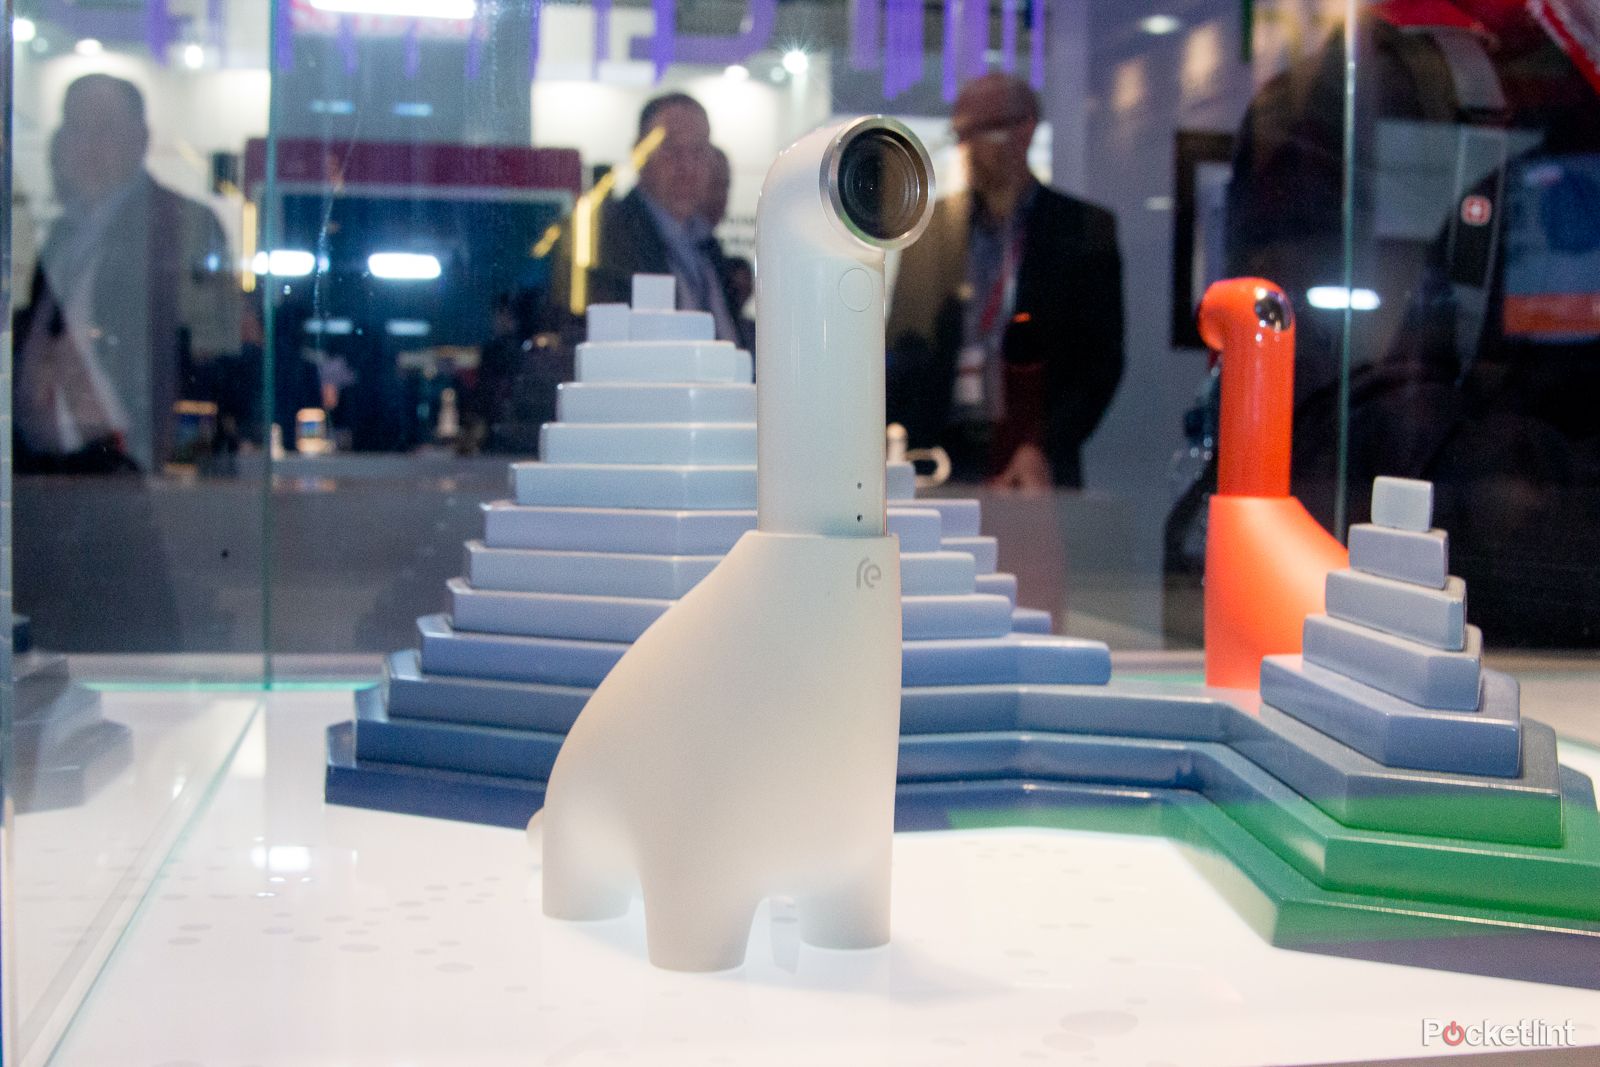 htc re dinosaur makes snapping photos and shooting video fun image 1